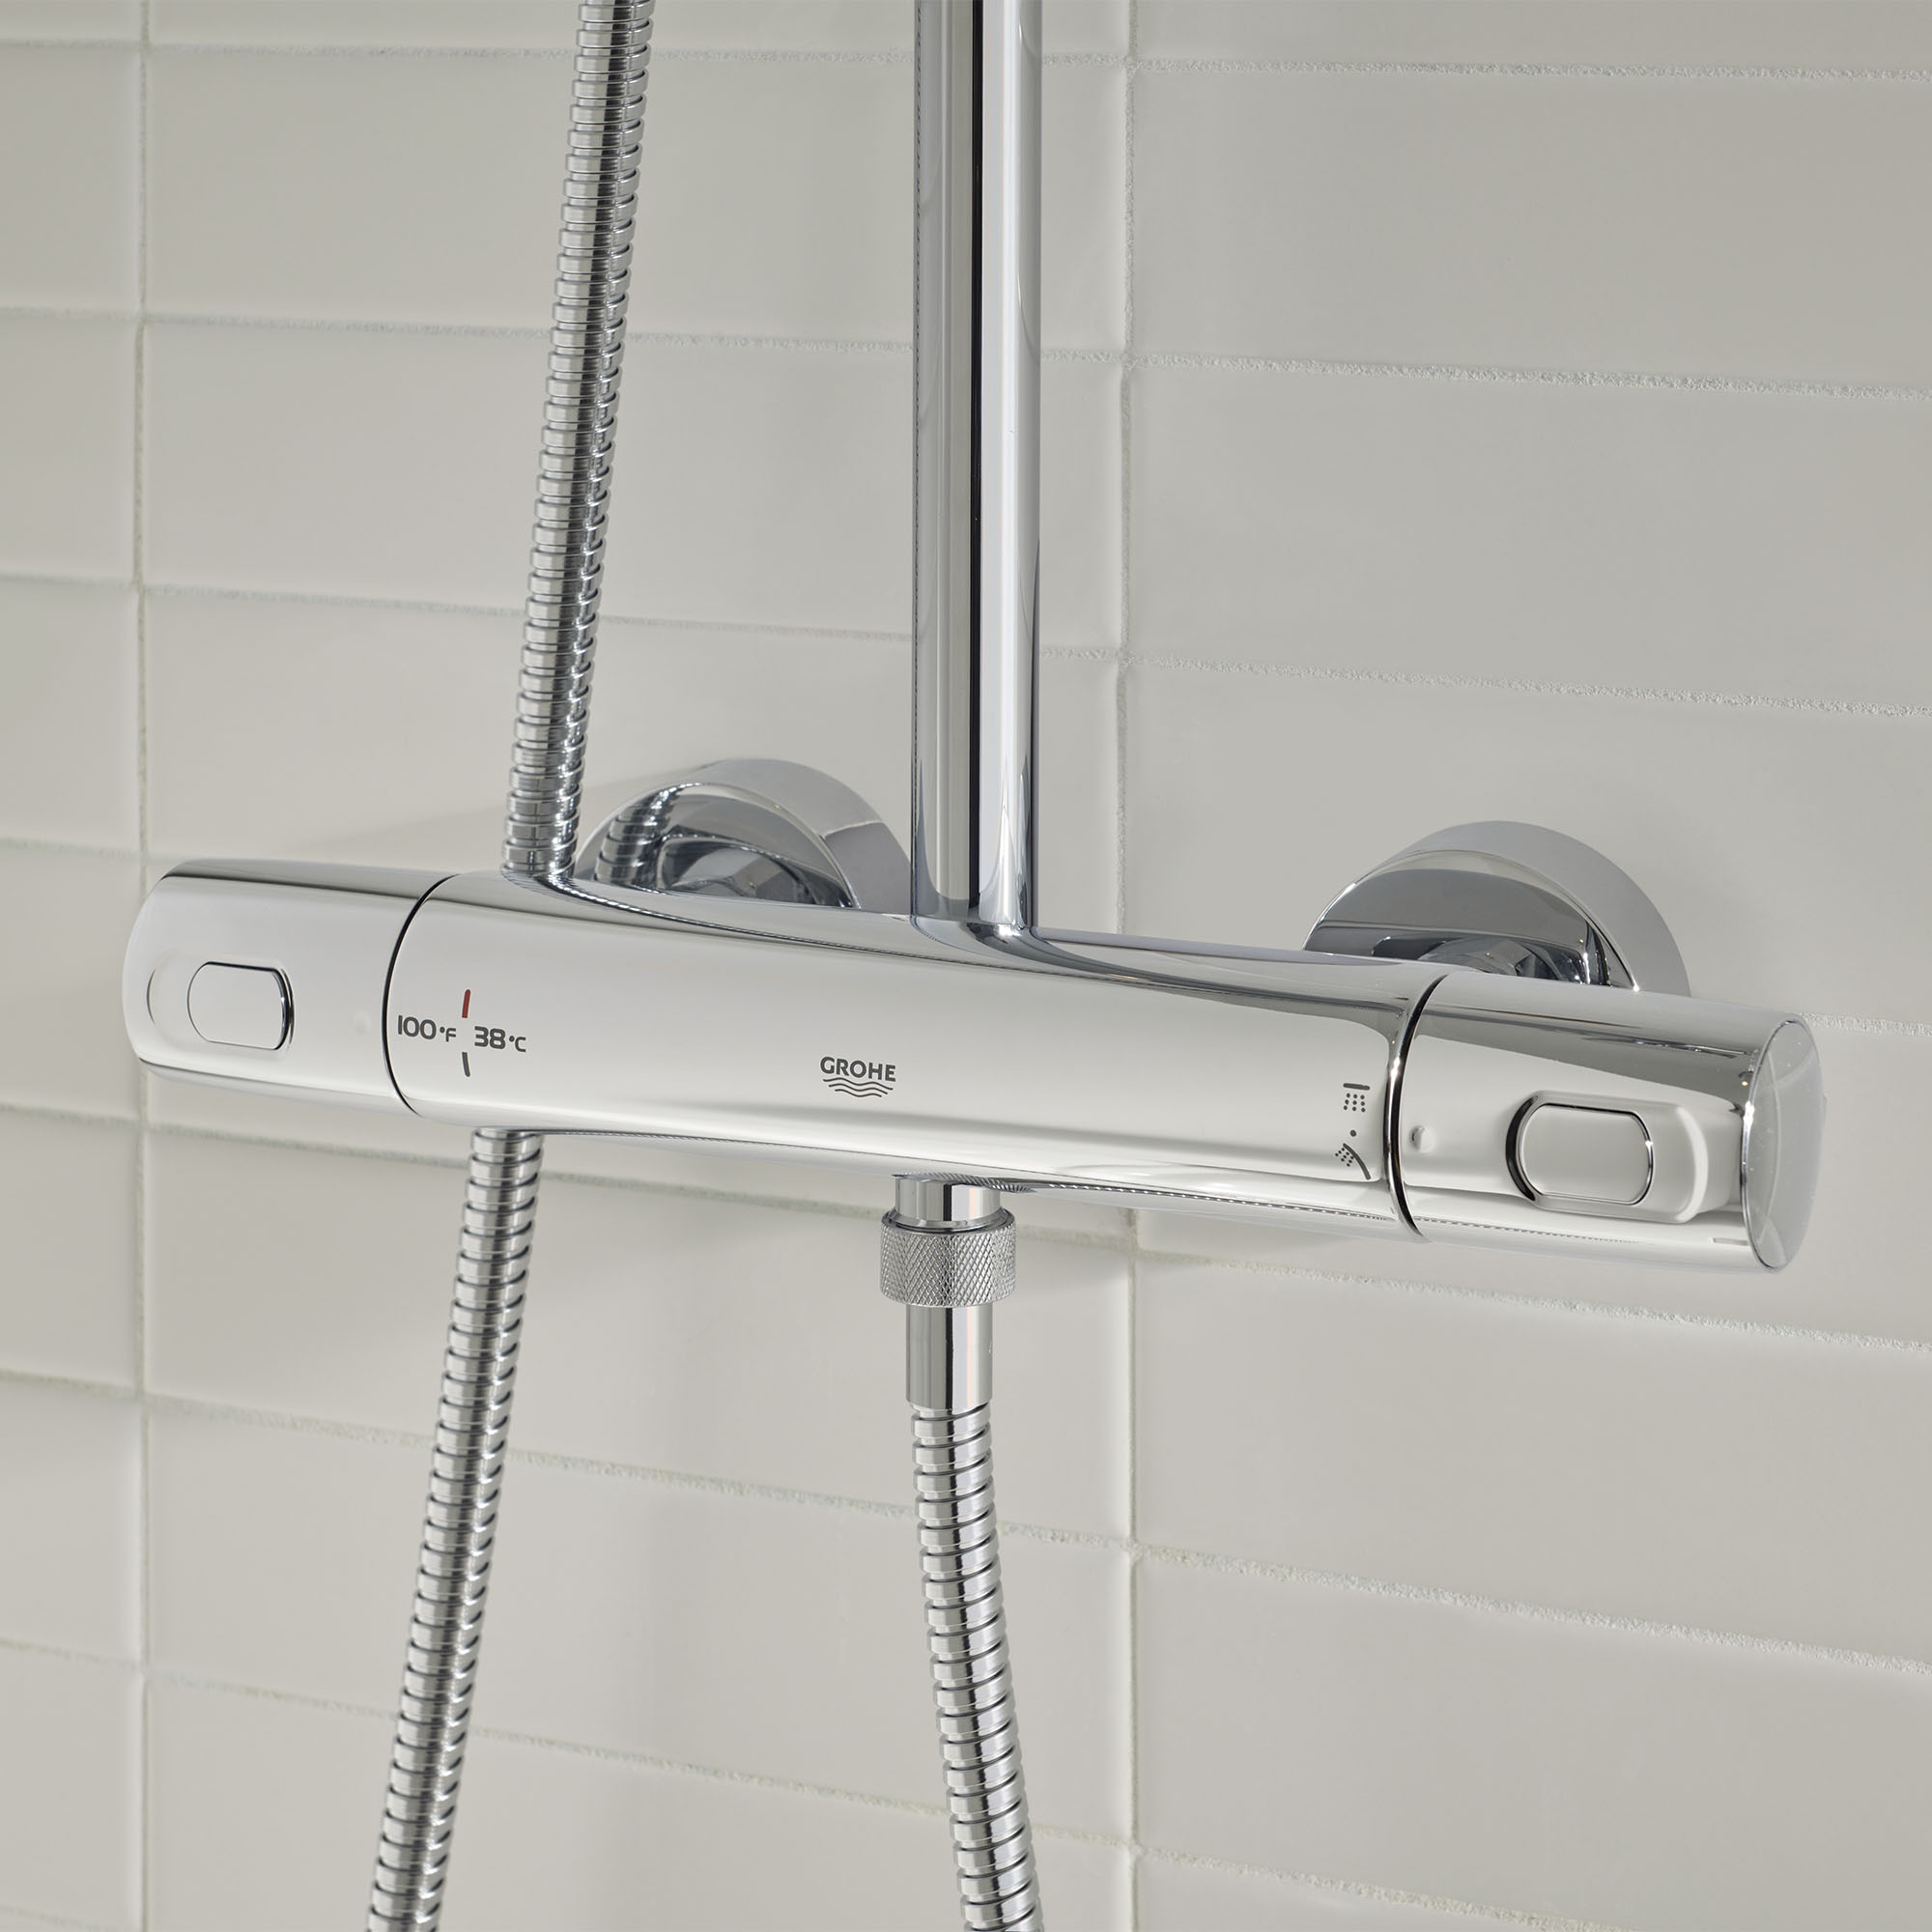 CoolTouch Thermostatic Shower System